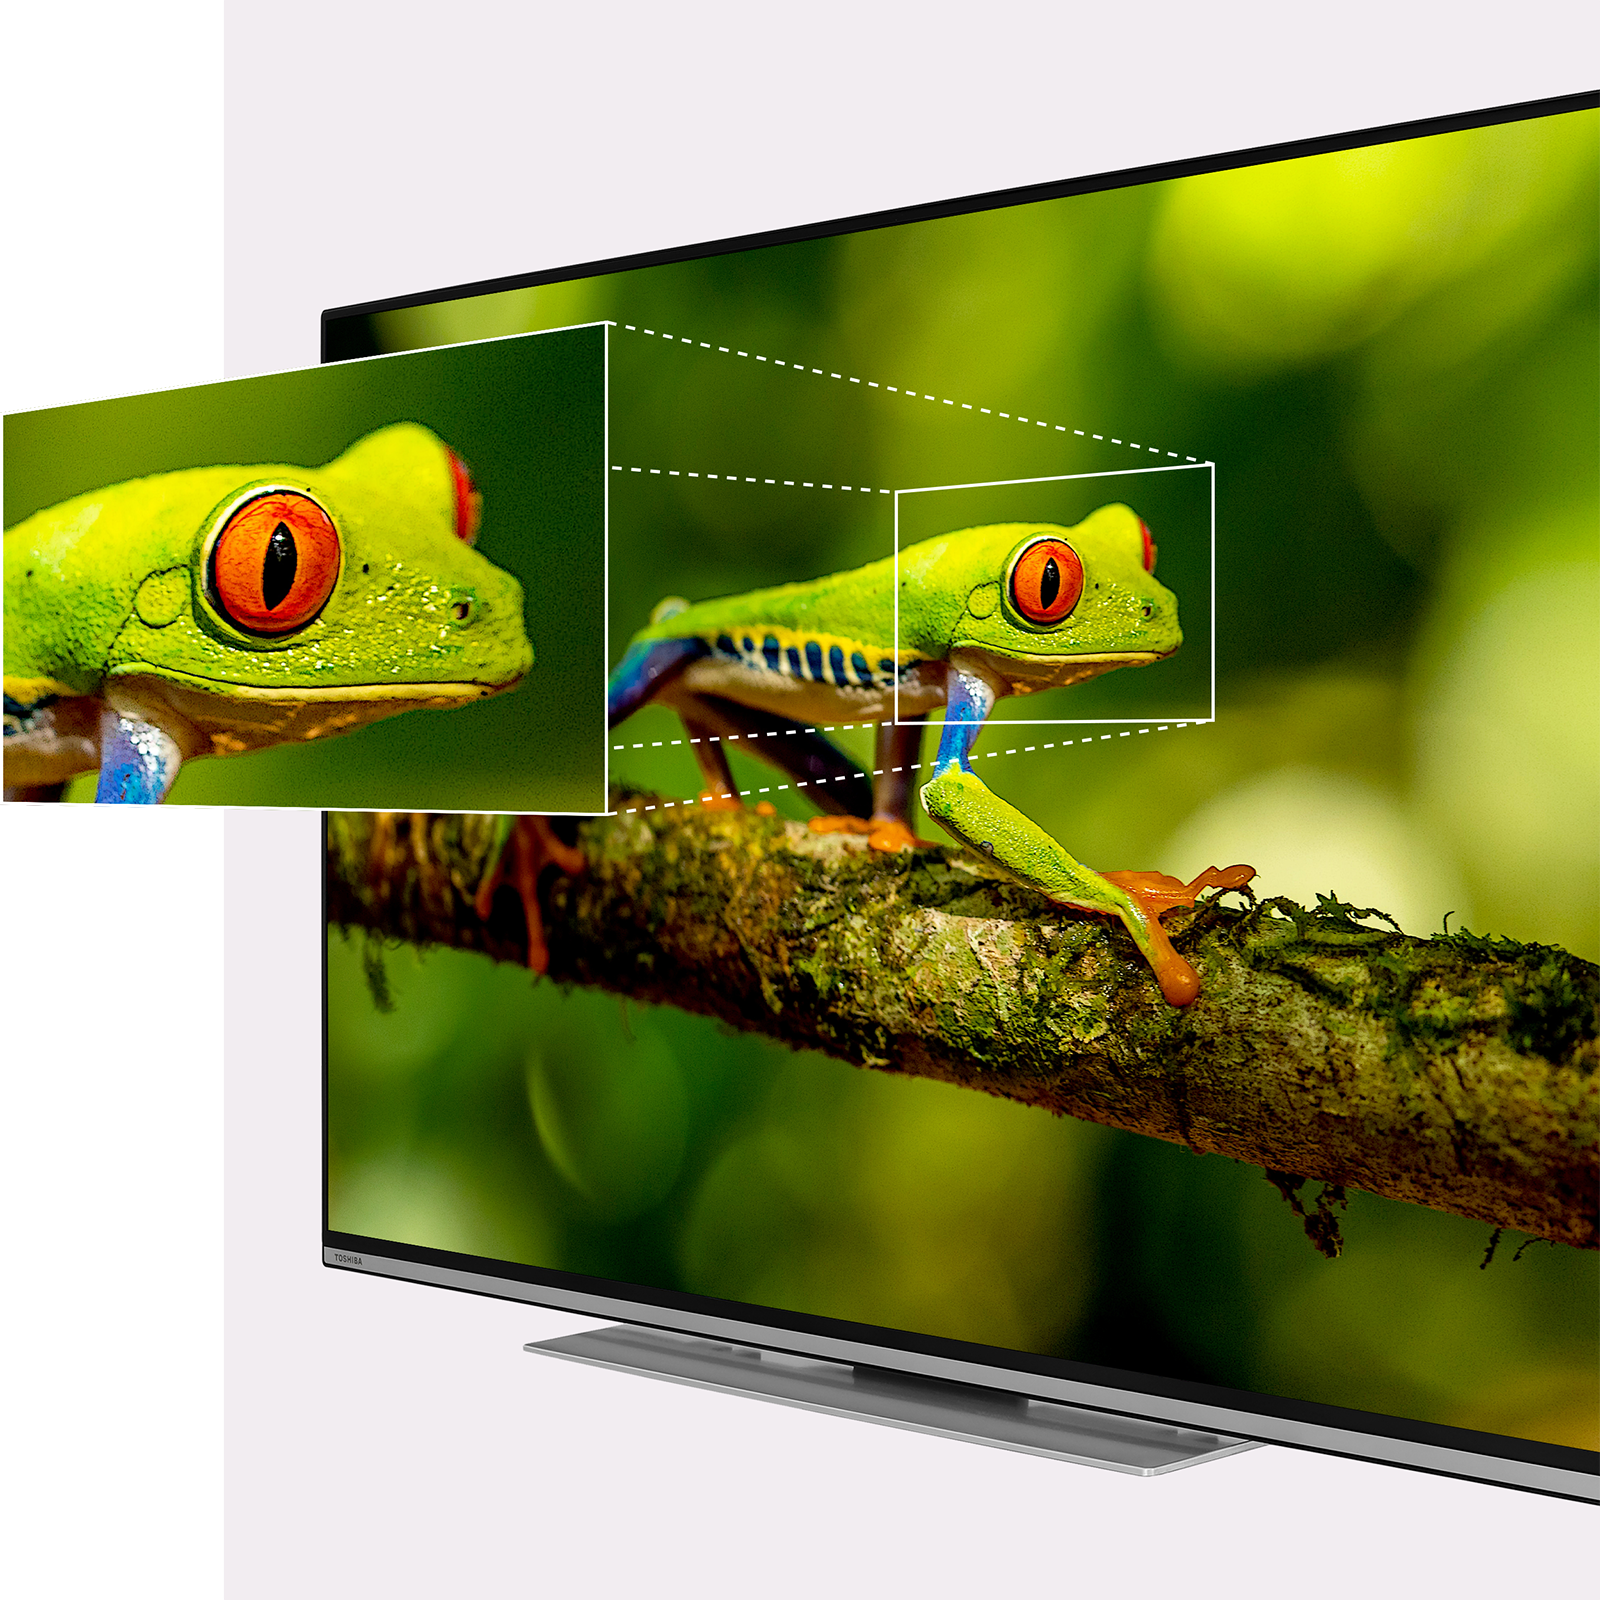 <ul class="a-unordered-list a-vertical a-spacing-mini"> <li><span class="a-list-item">Breathtaking images - Experience razor-sharp content on your QLED TV in brilliant 4K Ultra HD resolution. The combination of Dolby Vision / HDR 10, TRU resolution and micro dimming deliver particularly high-contrast images on the modern QLED display with a lifelike colour and impressive detail sharpness. Your TV experience will be amazingly realistic.</span></li> <li><span class="a-list-item">Limitless entertainment - Let yourself be inspired by the diverse range of Android Smart TV. Whether serial marathon, movie night or thrilling sporting events – you have access to countless apps and media libraries such as Prime Video, Netflix, DAZN, Disney+, YouTube, Twitch, ARD, ZDF and much more. (If using streaming services, additional subscription costs may be applied).</span></li> <li><span class="a-list-item">Smart control - Easily control the smart TV with your voice via Google Assistant (an additional smart speaker is not required). A simple "OK Google" is enough to change station, adjust volume, open apps and much more. is a breeze. You can also easily play media from your mobile devices on the TV via Google Chromecast.</span></li> <li><span class="a-list-item">Variety of options - Enjoy a perfectly tuned sound experience thanks to the built-in speakers from Onkyo. Numerous connections such as 3x HDMI (CEC + ARC), 2x USB with media player as well as WLAN and Bluetooth also offer plenty of uses for game consoles, DVD player/recorders, additional sound devices and much more.</span></li> <li><span class="a-list-item">More than just a TV - The flat screen has a screen diagonal of 164 cm (65 inches). The integrated triple tuner allows you to receive TV via antenna (DVB-T2), cable (DVB-C) or satellite (DVB-S2) directly on the TV. An additional receiver is not required.</span></li> </ul>